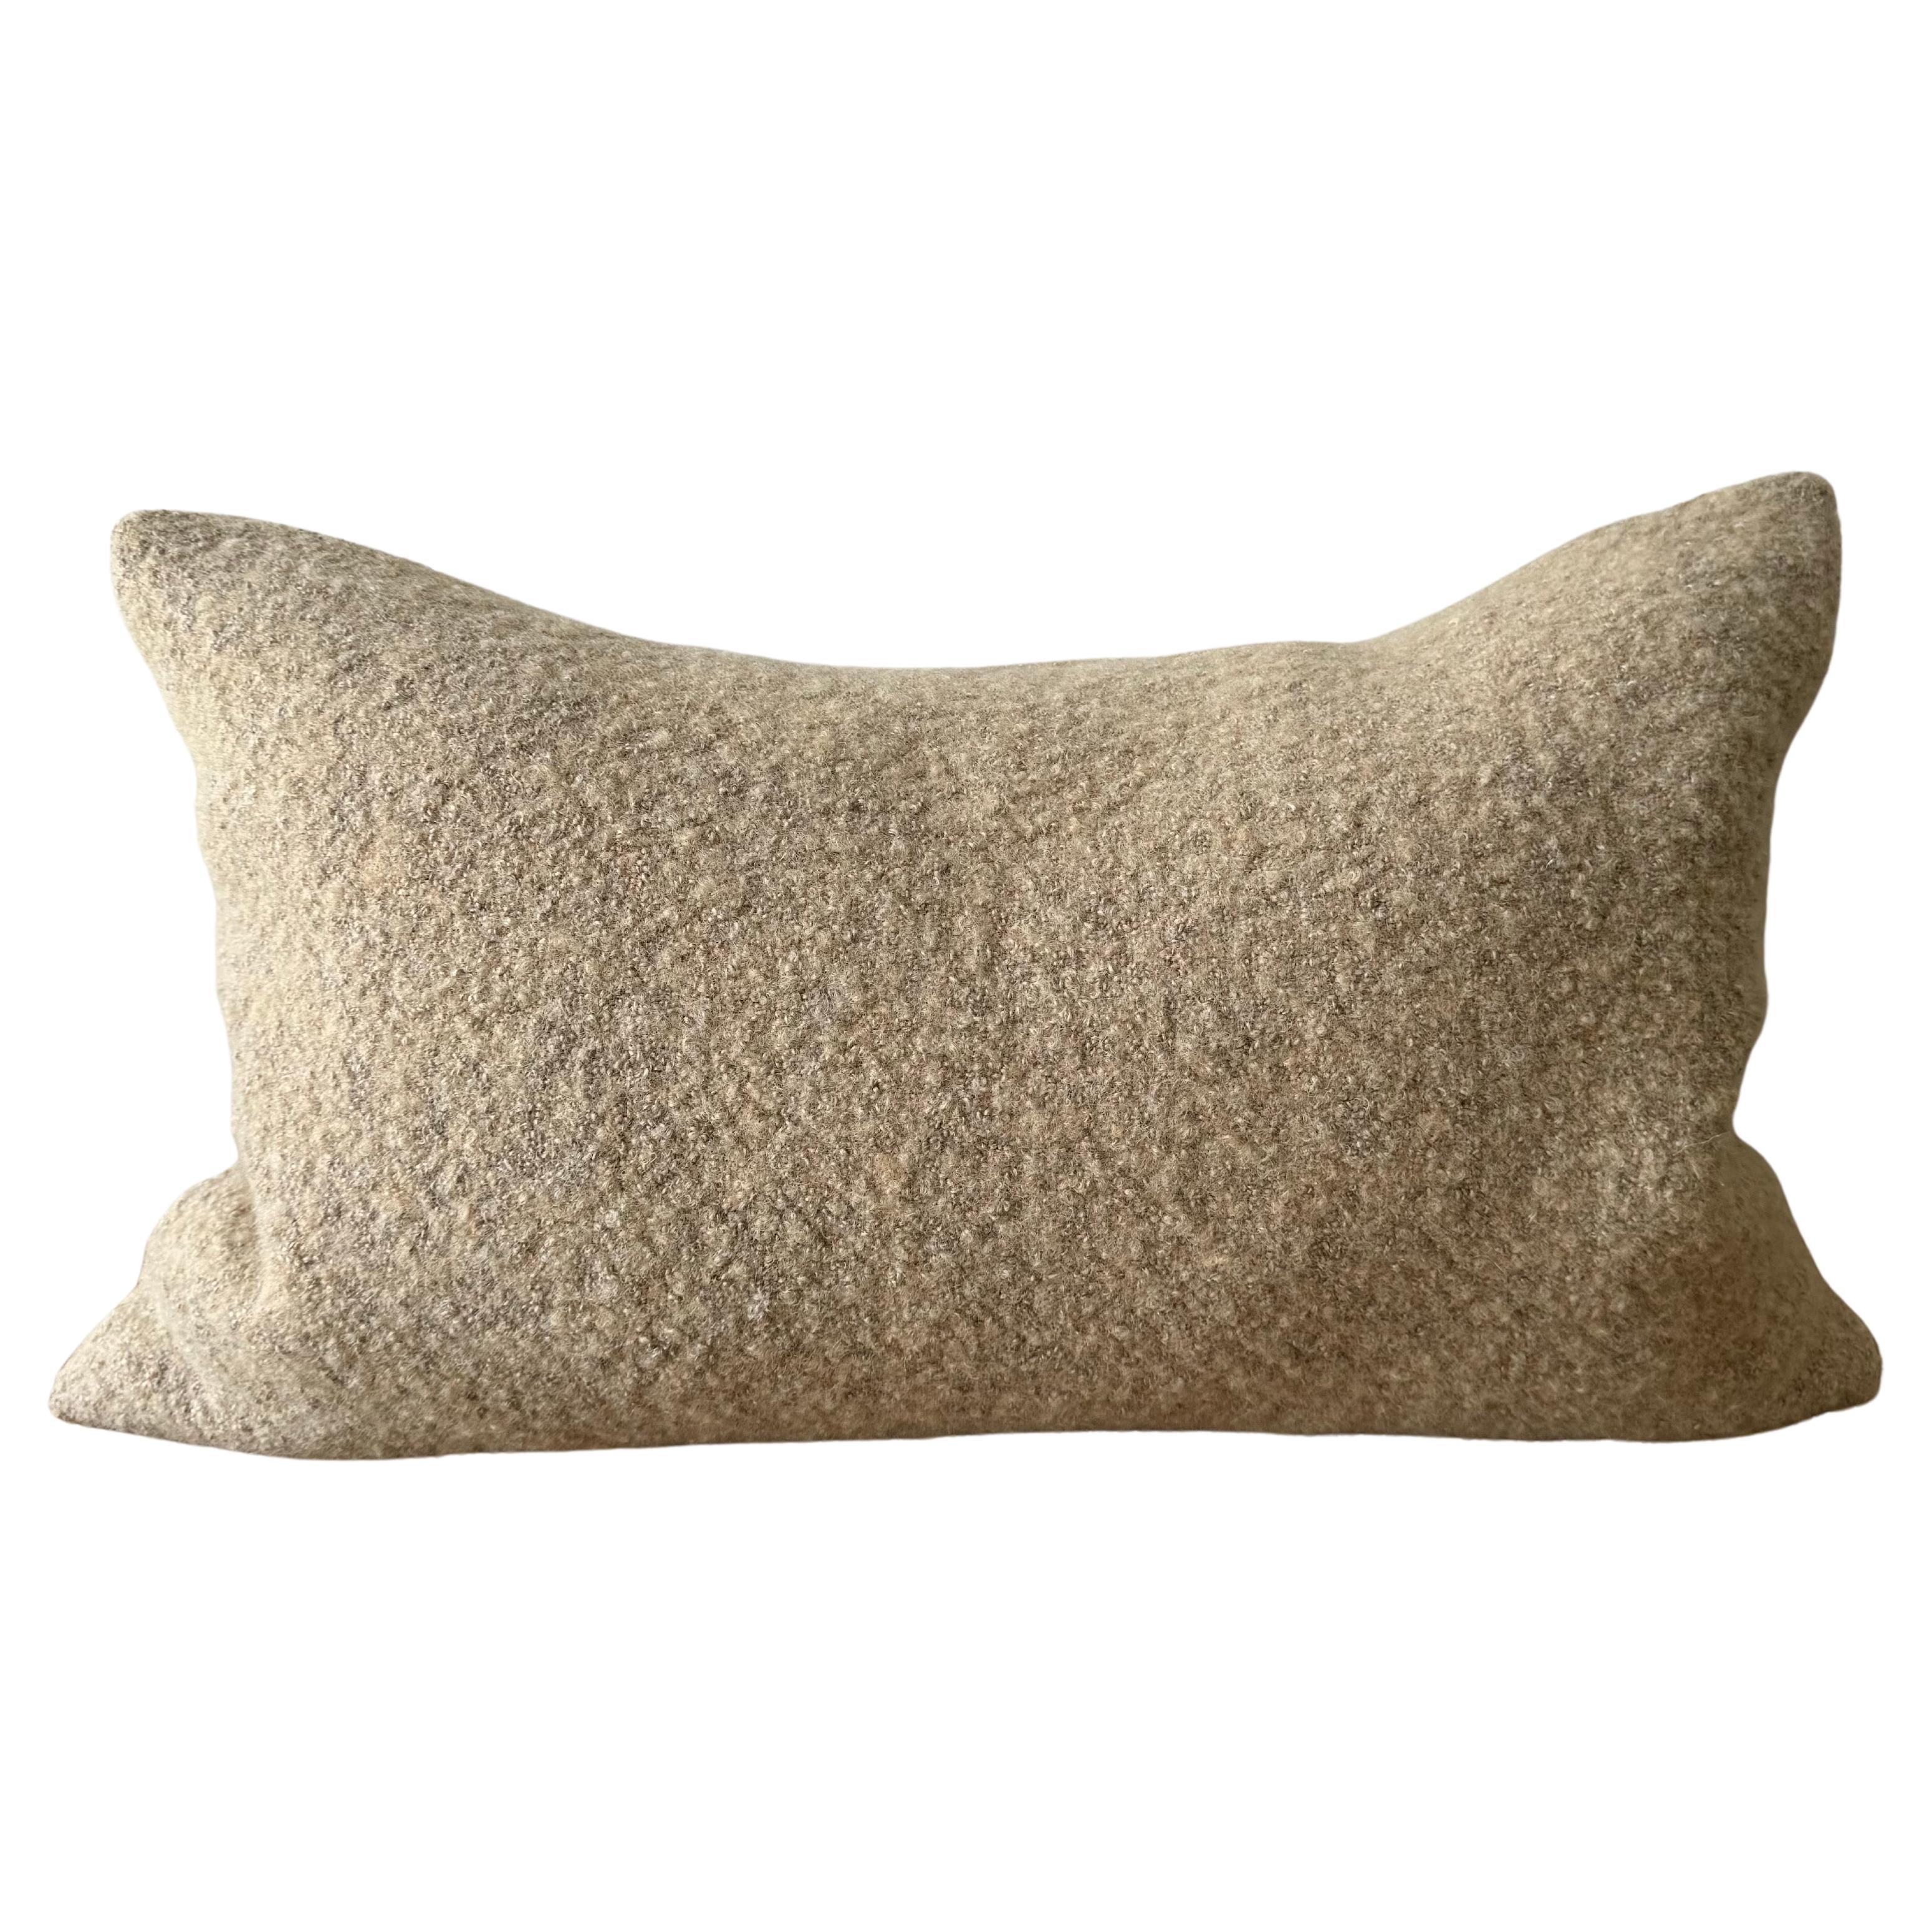 Custom Wool and Linen Blend Pillow with Brass Zipper and Down Feather Insert